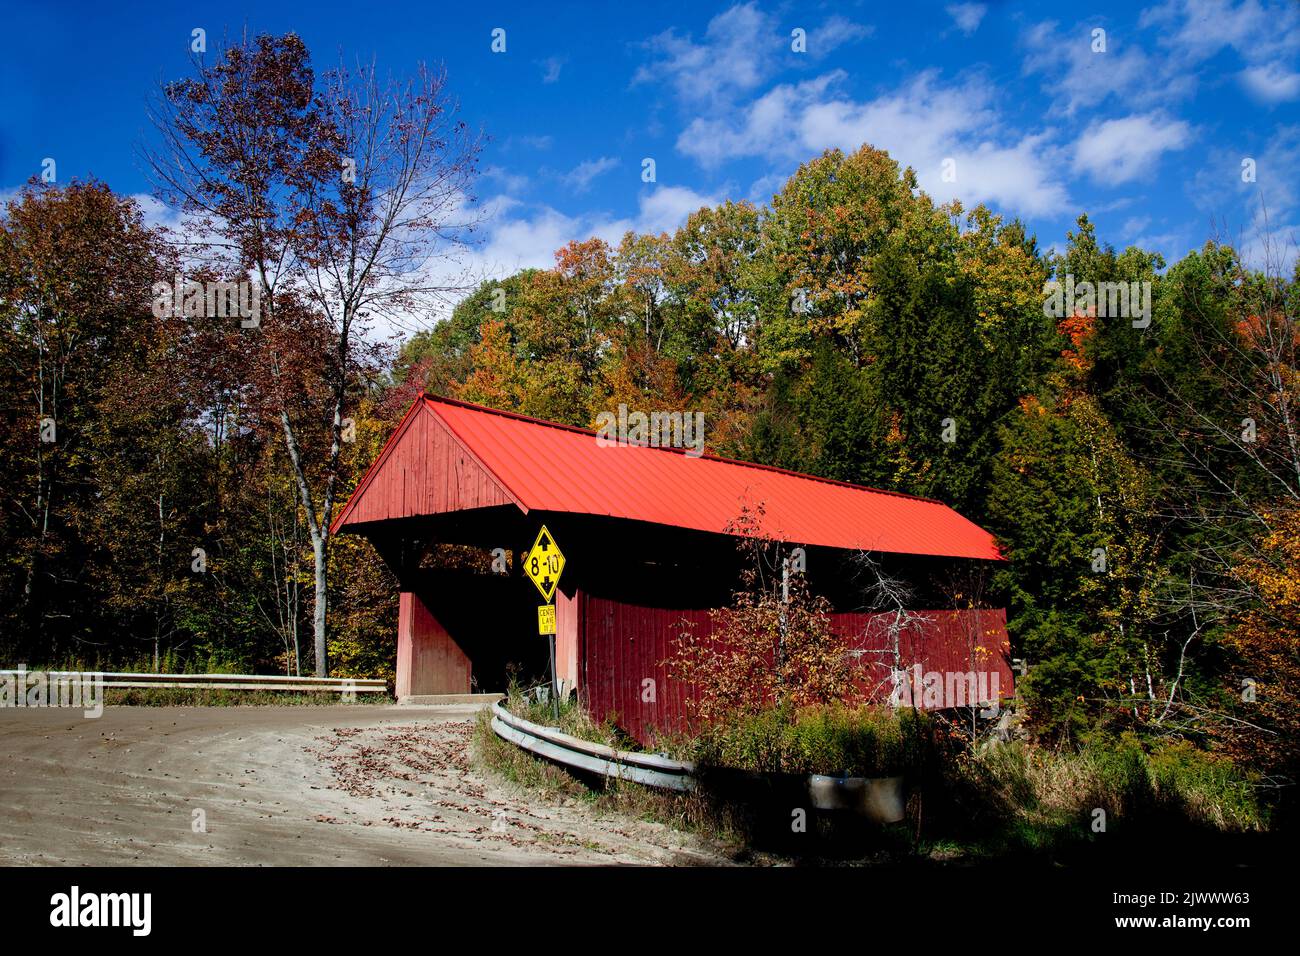 Covered bridge found on a country road near Stowe, Vermont, USA on a beautiful autumn day Stock Photo